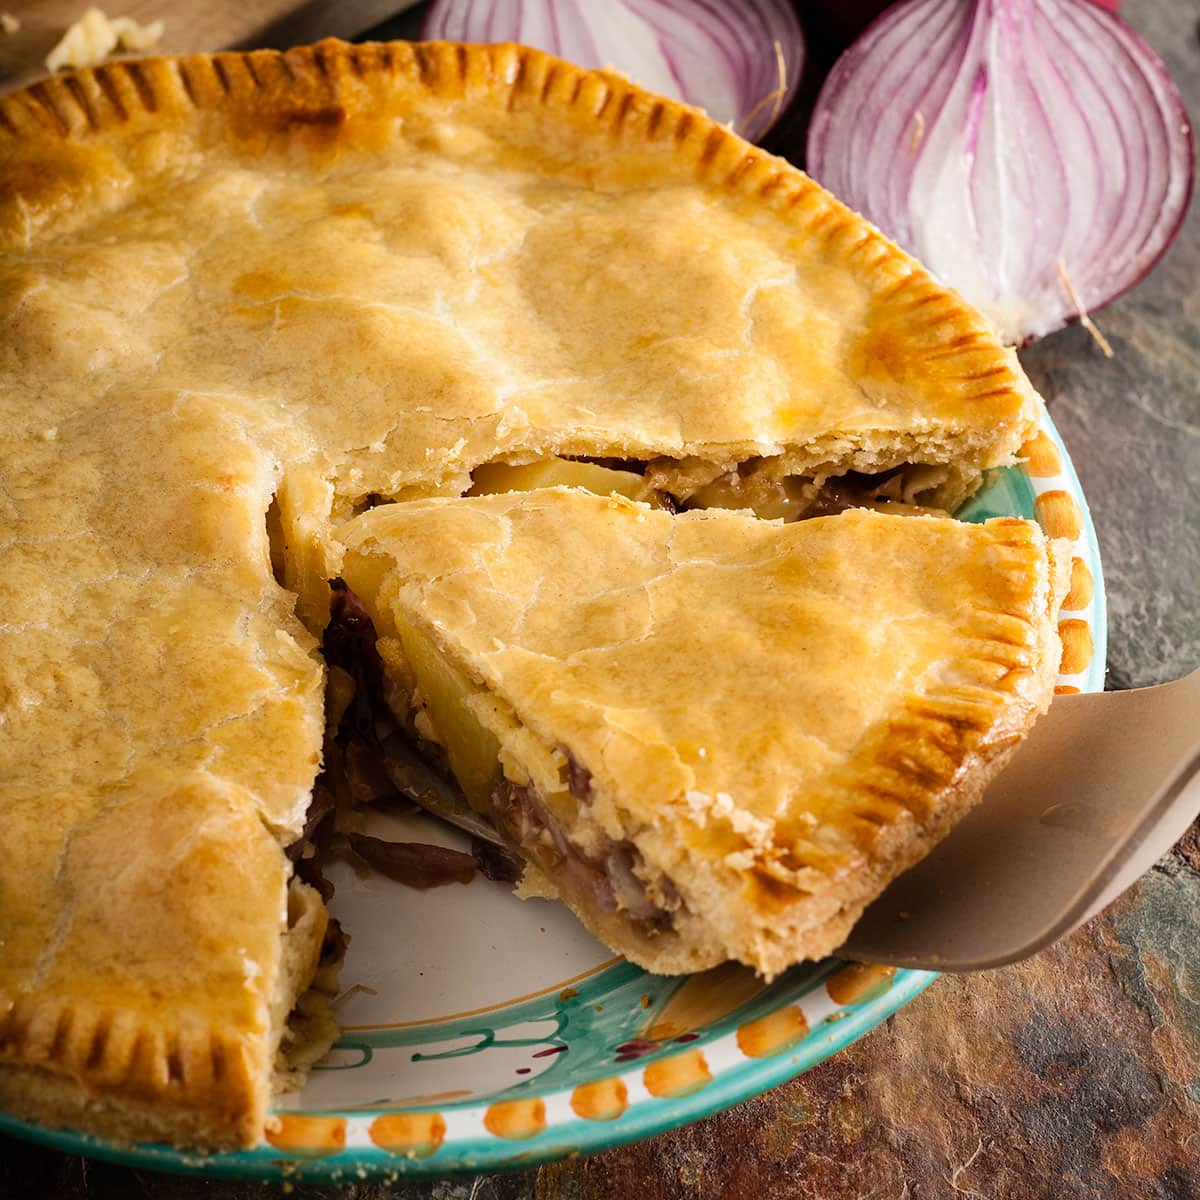 Lancashire cheese and onion plate pie with slice cut.